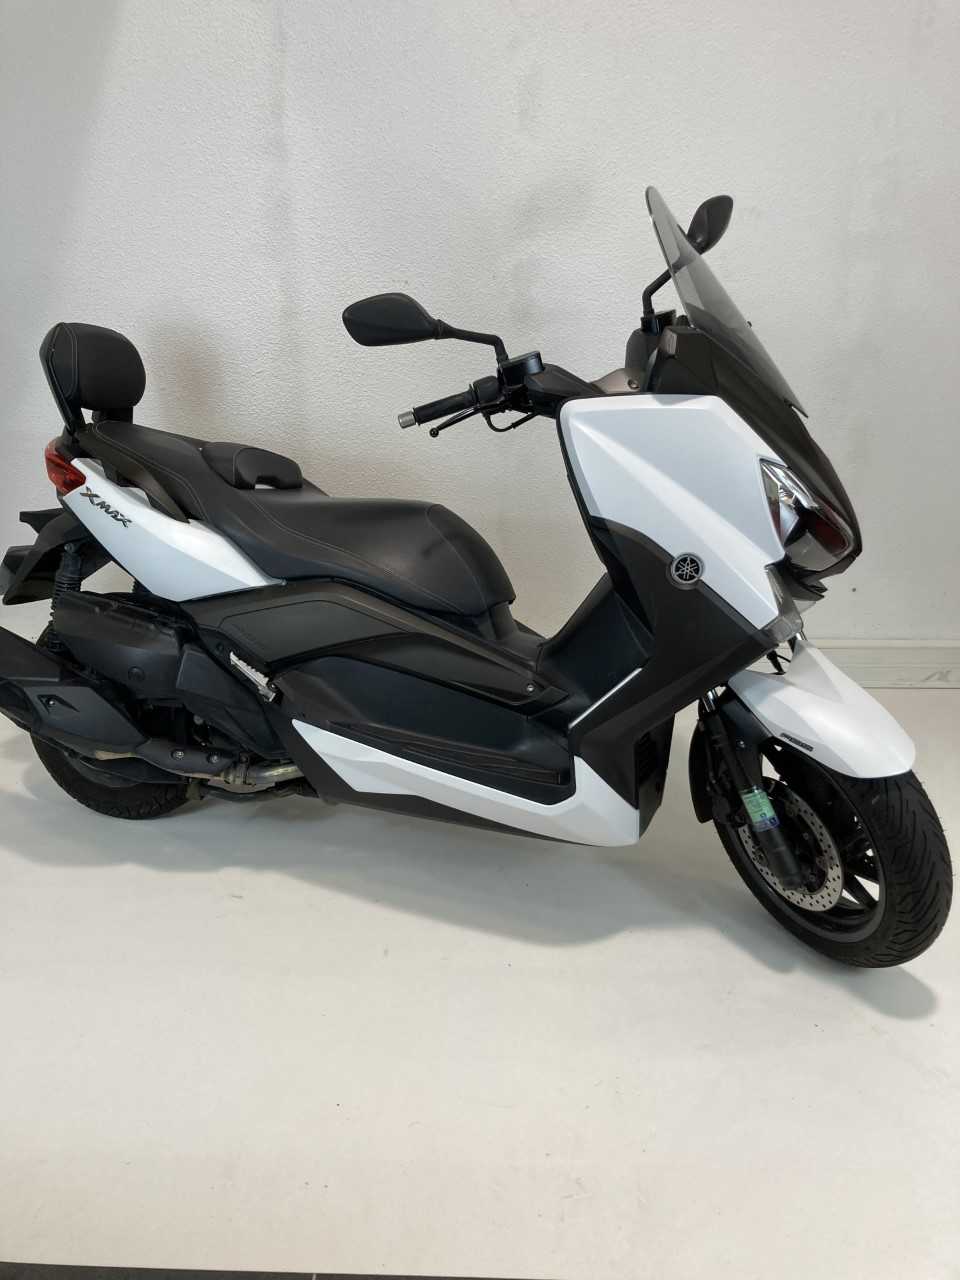 Yamaha YP 400 R X-Max ABS 2014 vue 3/4 droite